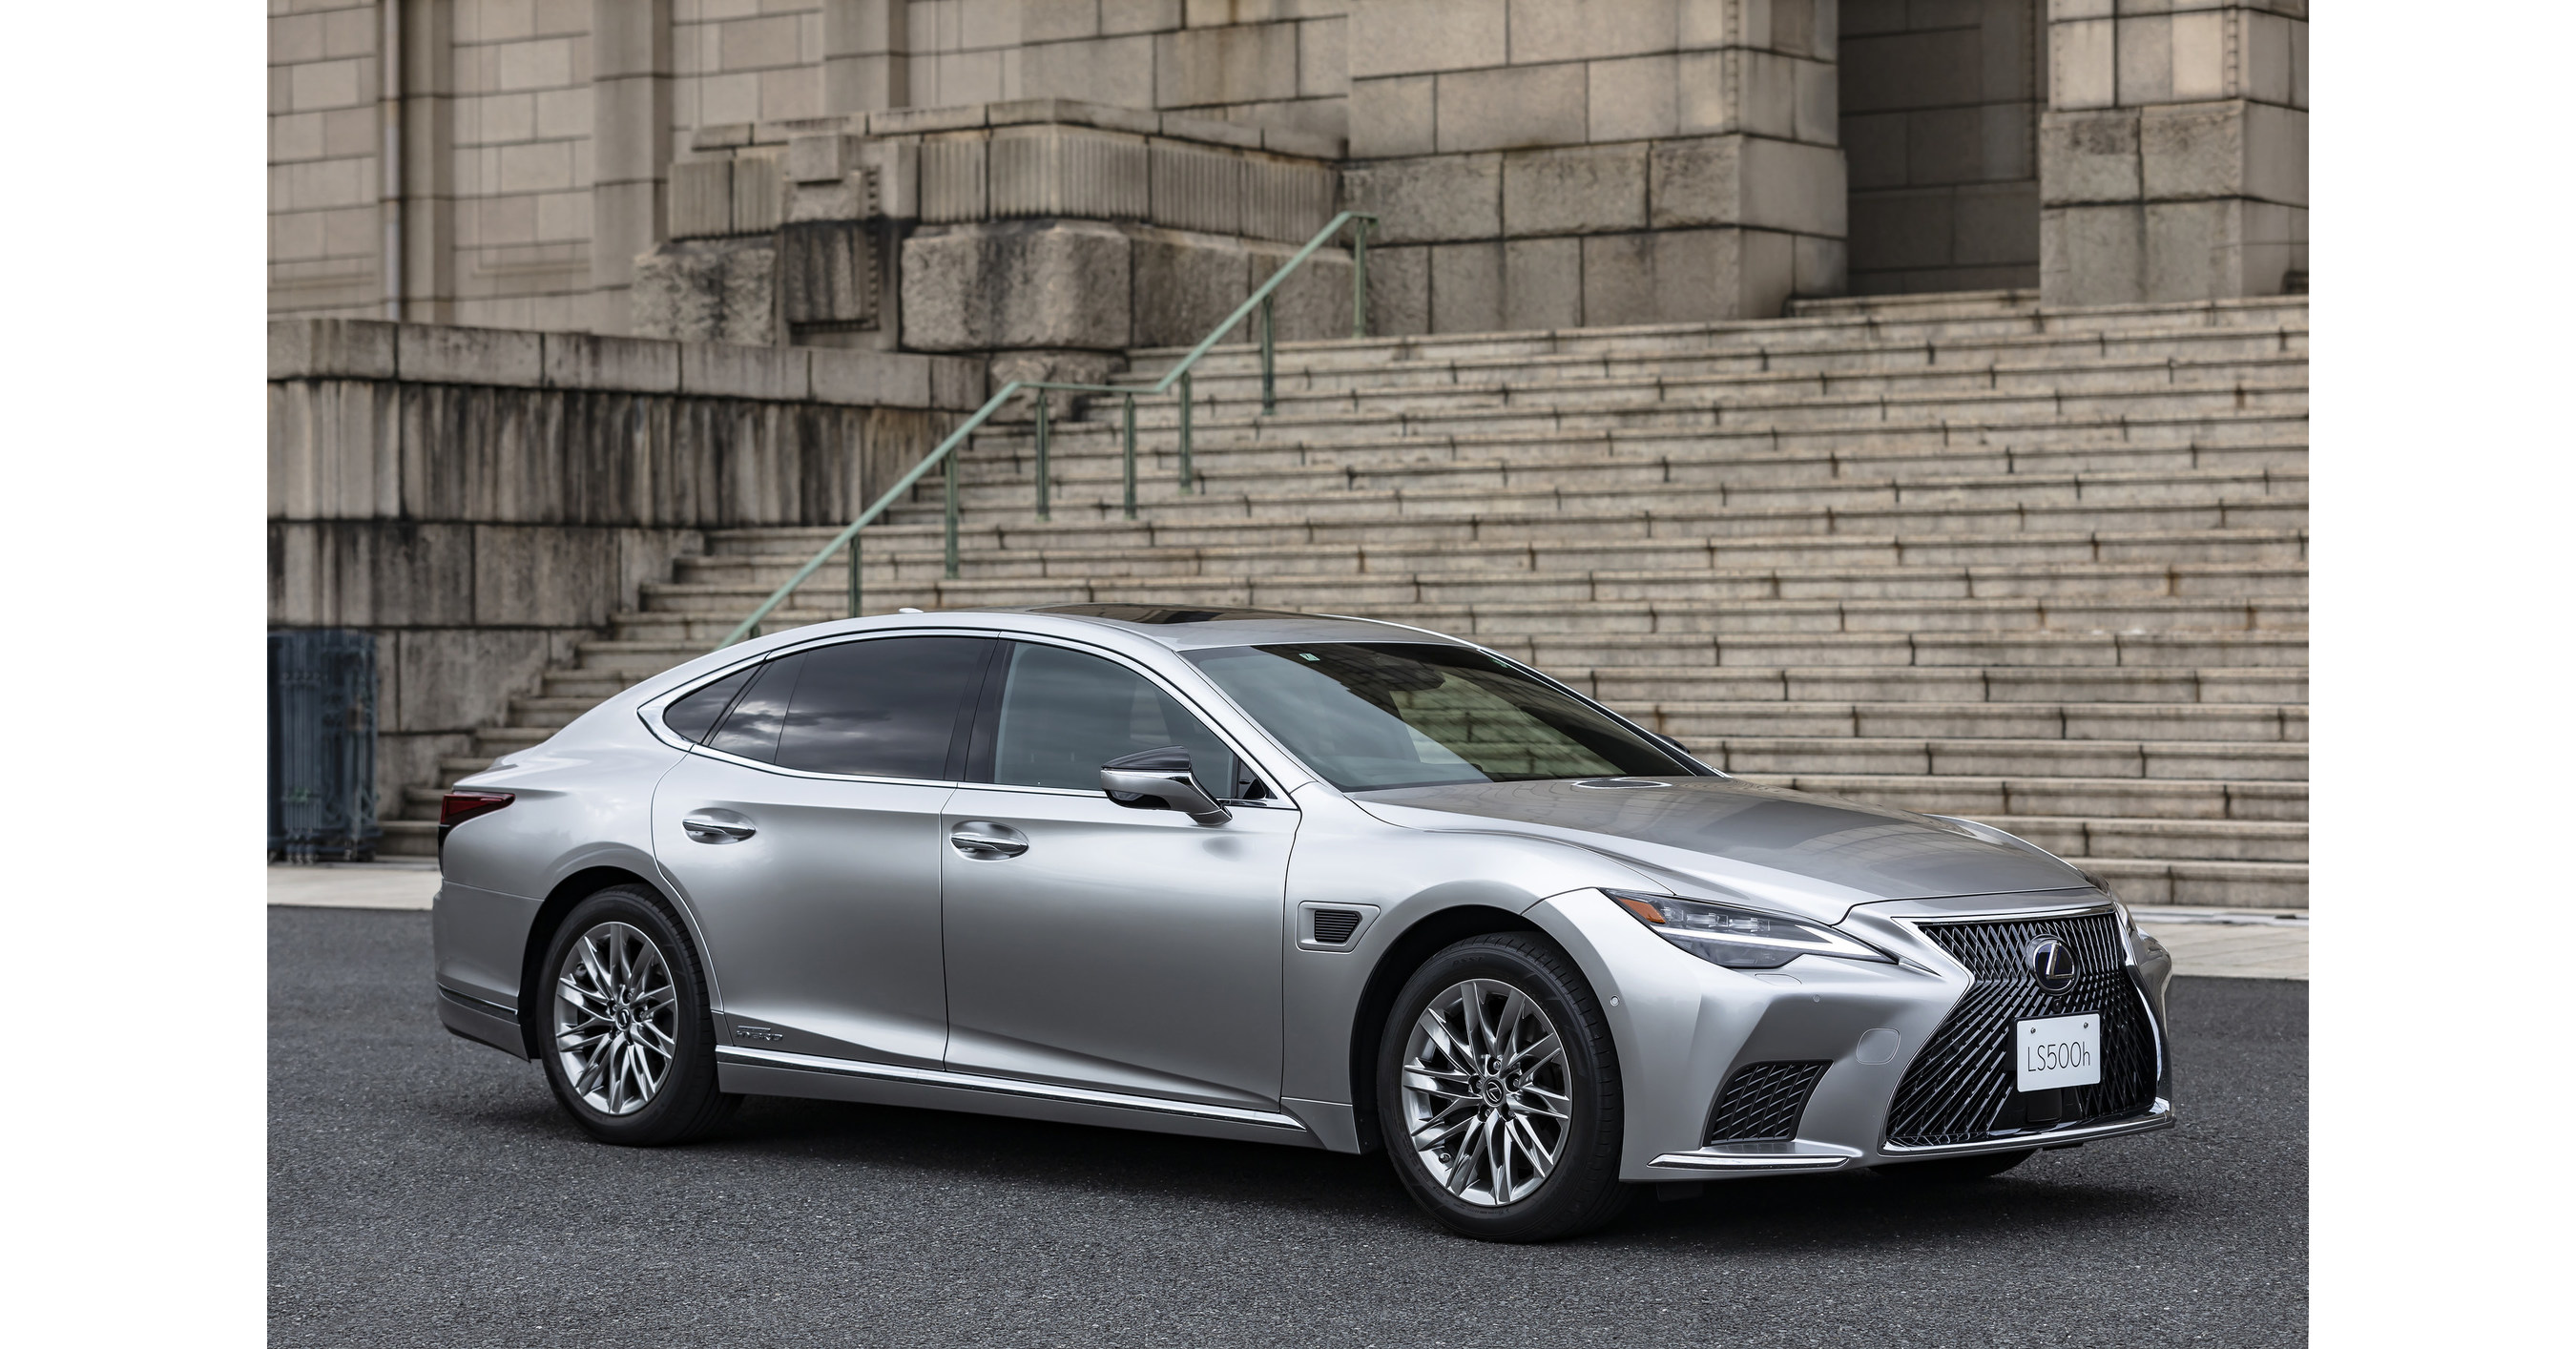 22 Lexus Ls 500h Arrives This Fall With Lexus Teammate Advanced Driver Assistance Technology